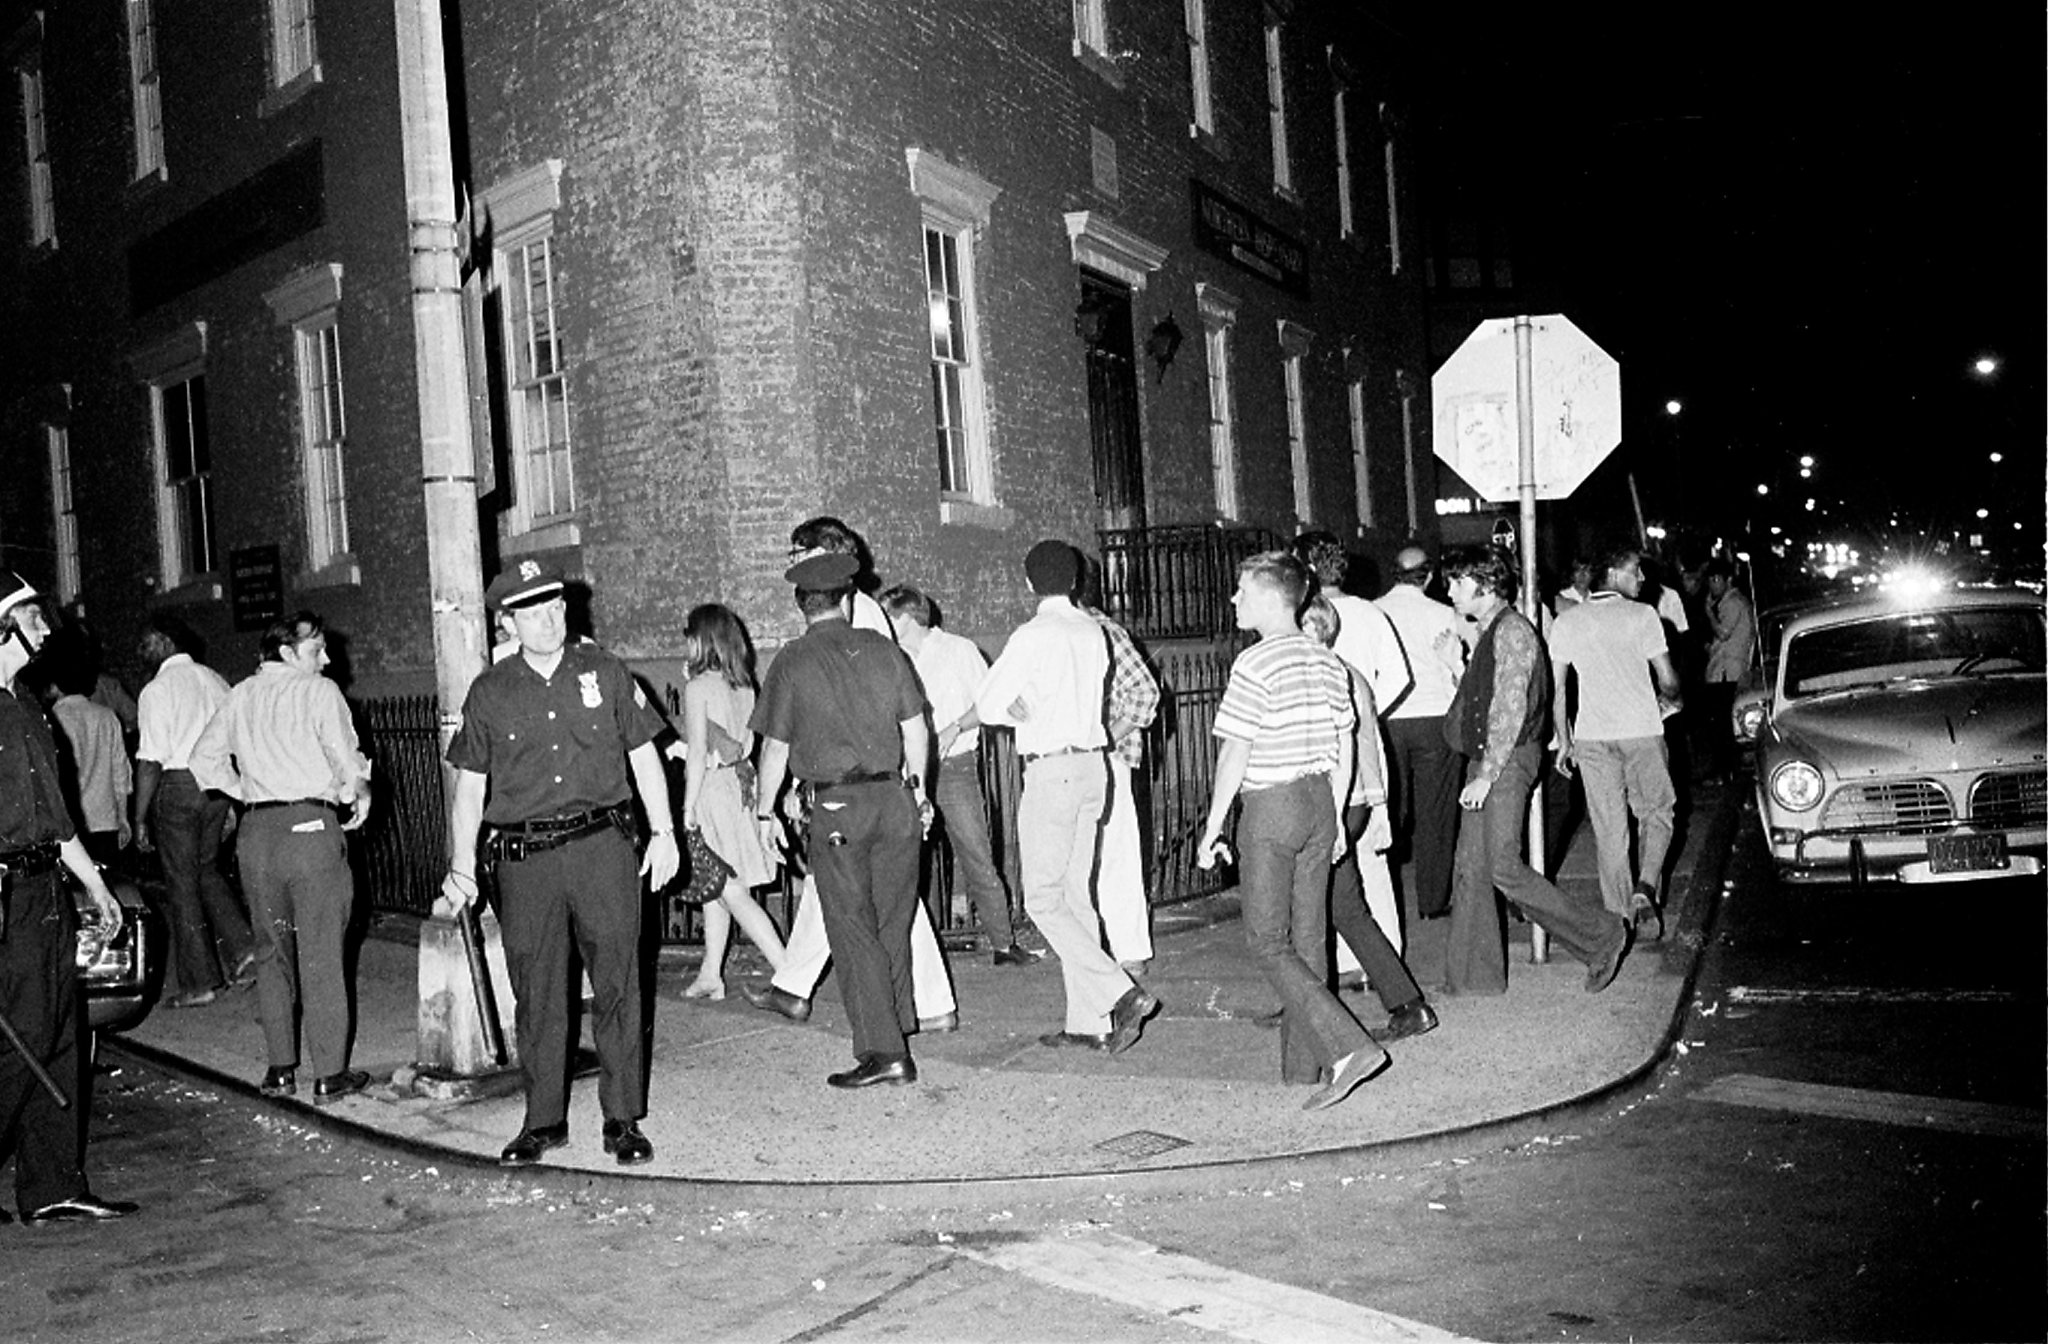 The stonewall riots didn't start the gay rights movement